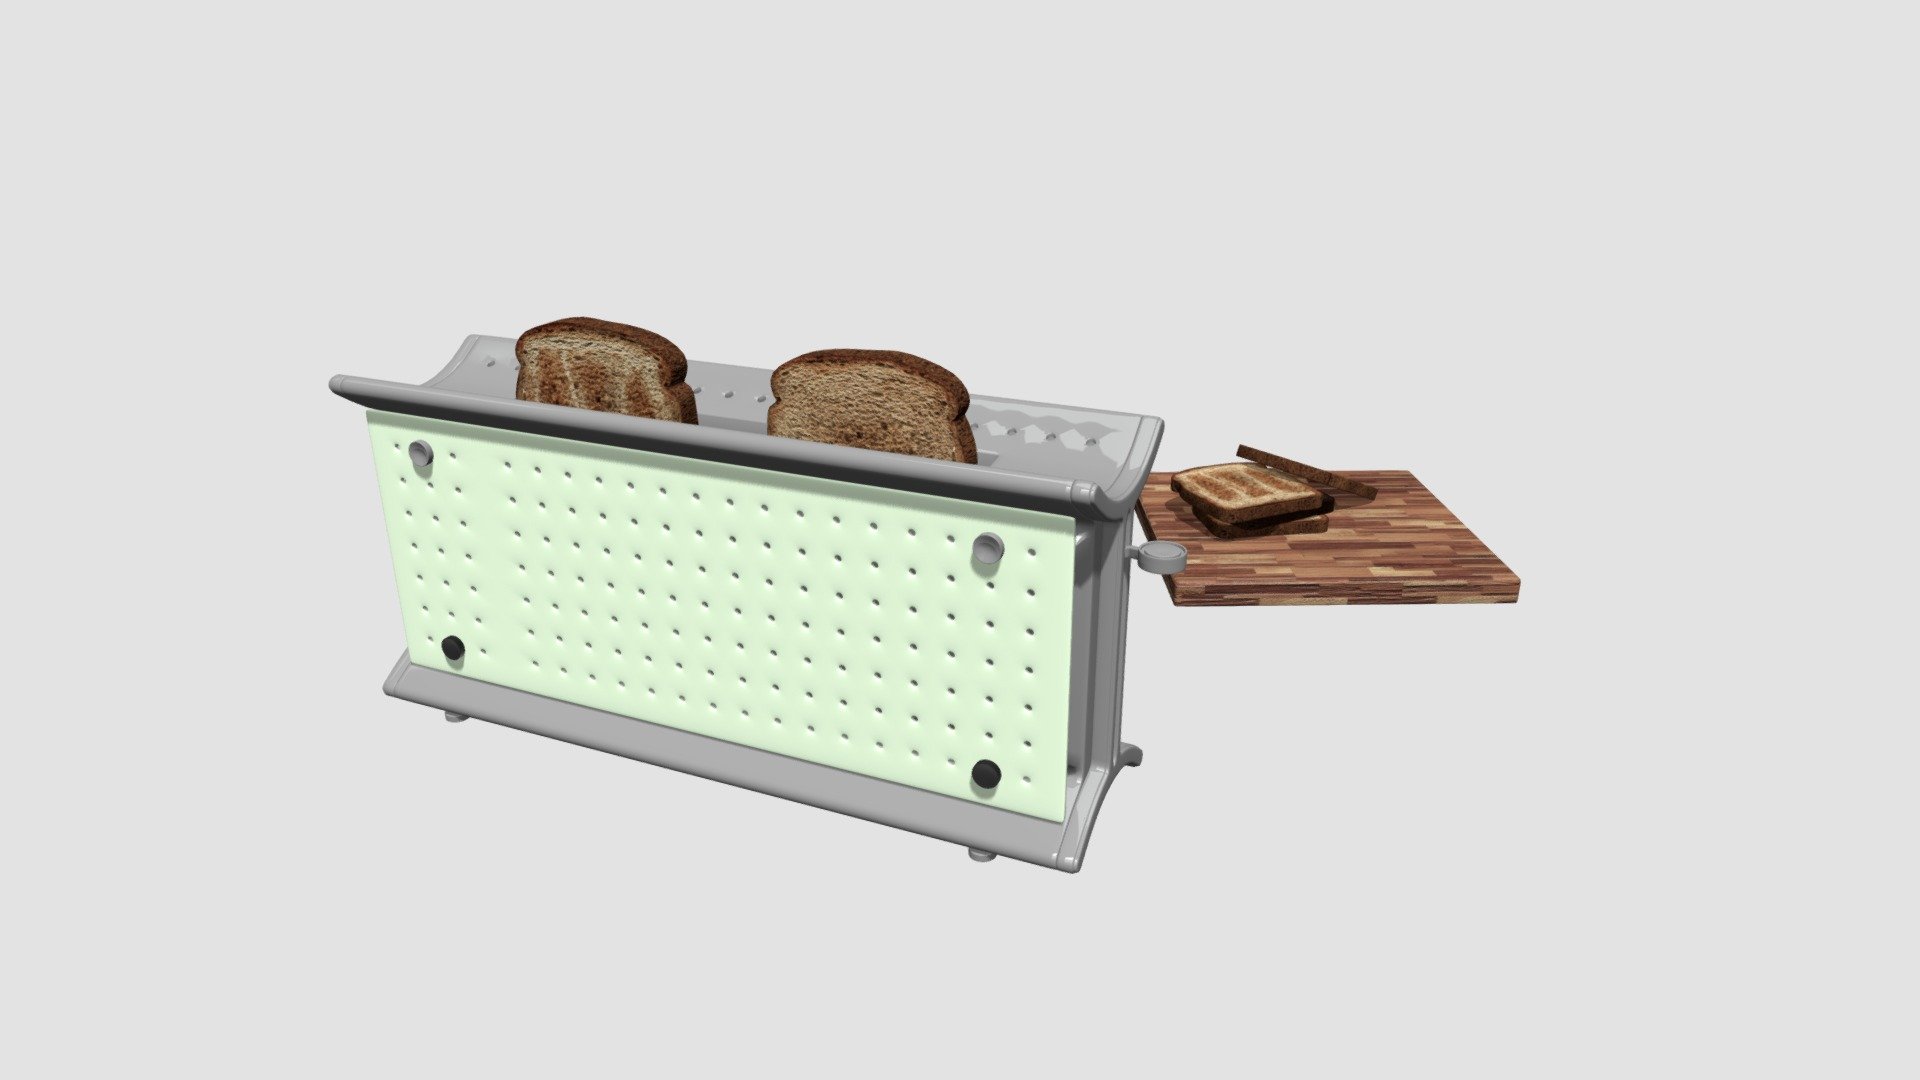 Highly detailed 3d model of toaster with all textures, shaders and materials. It is ready to use, just put it into your scene 3d model